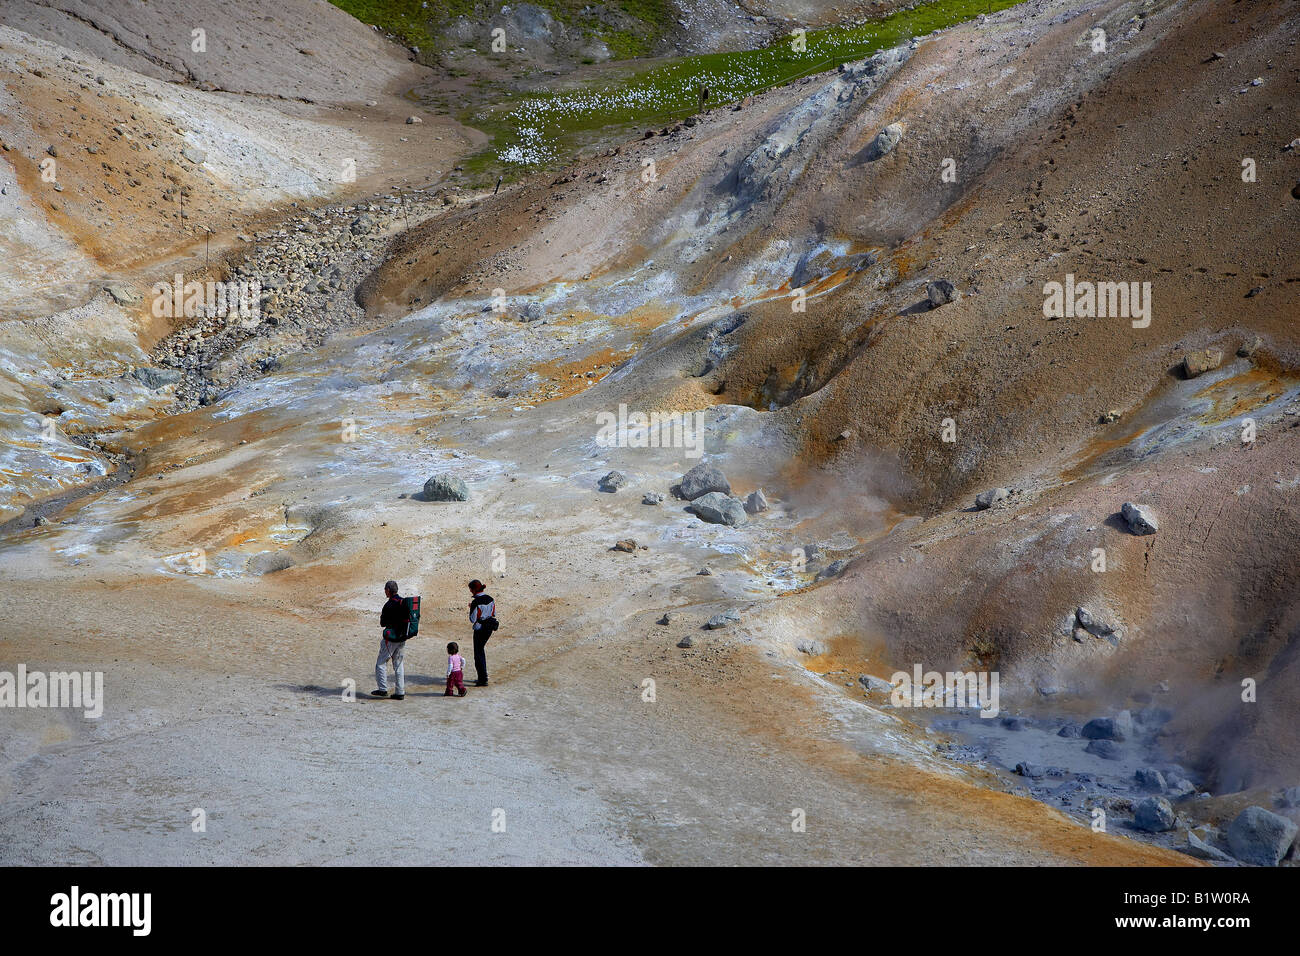 Family Hiking in Geothermal Field, Krafla area, Iceland Stock Photo